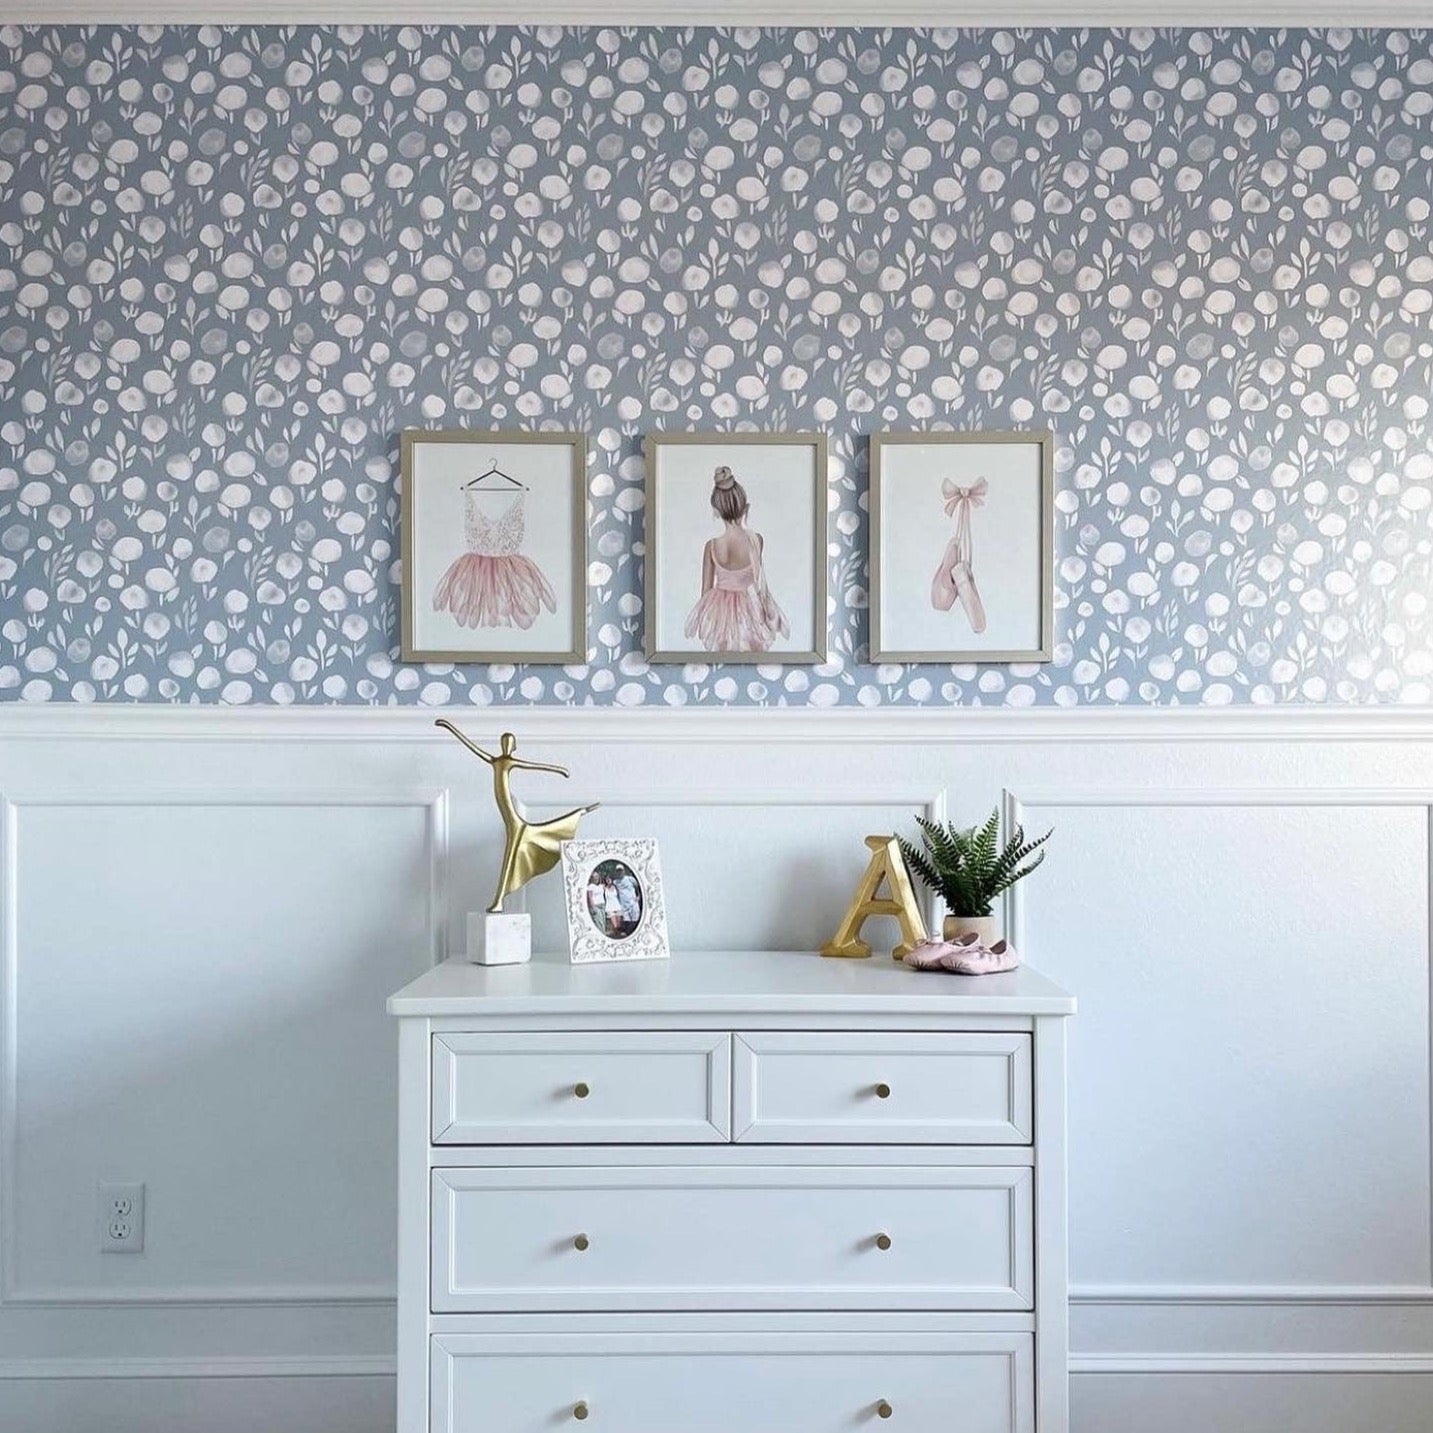 A tastefully decorated wall featuring the 'Subtle Botanica II - Inverted' wallpaper above wainscoting, accented with framed artwork of ballet attire and a chic dresser, creating an elegant space that is both sophisticated and whimsical.